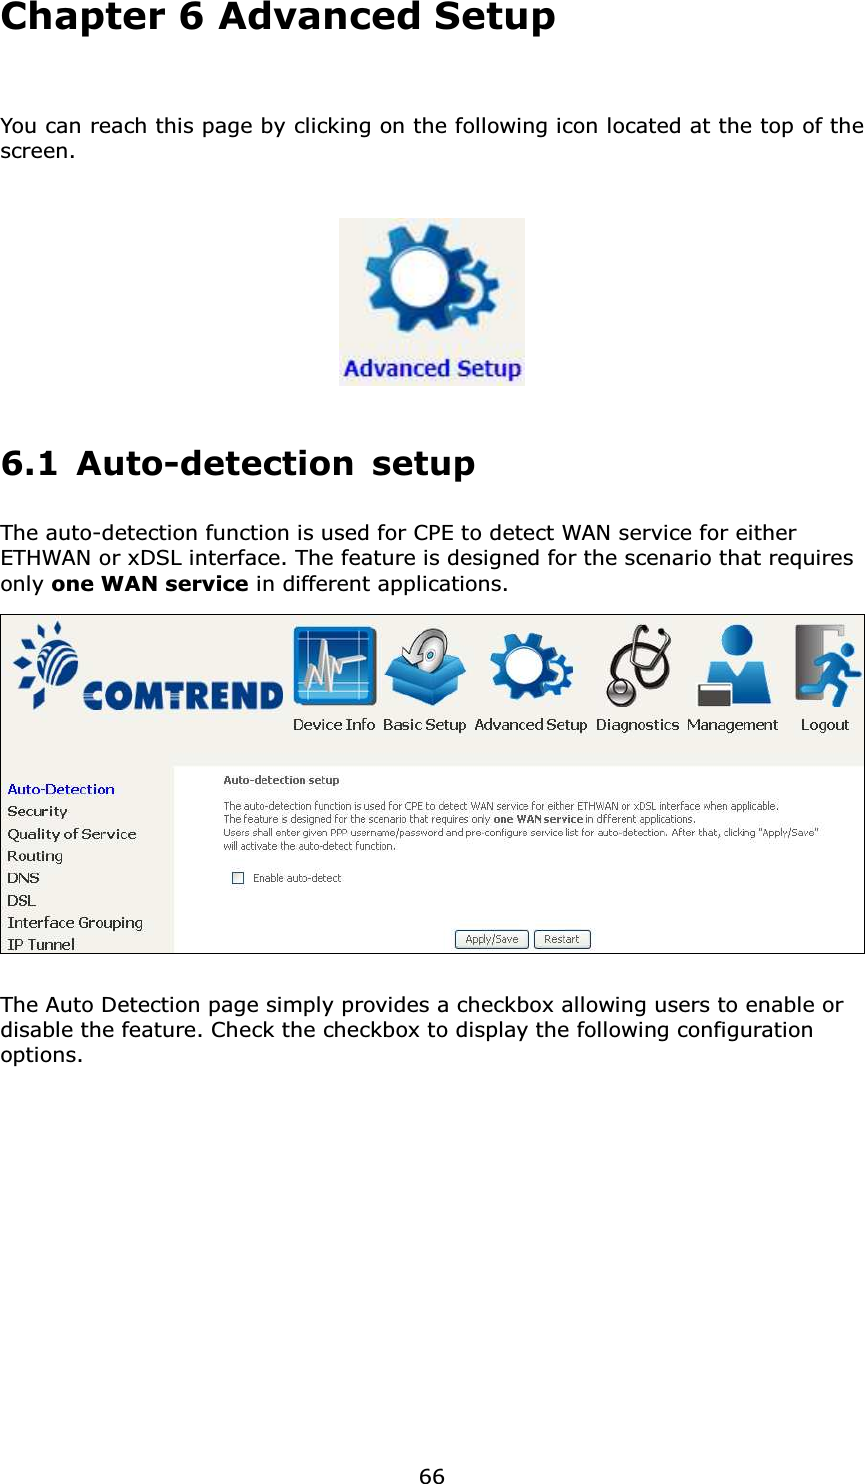  66Chapter 6 Advanced Setup  You can reach this page by clicking on the following icon located at the top of the screen.  6.1 Auto-detection setup The auto-detection function is used for CPE to detect WAN service for either ETHWAN or xDSL interface. The feature is designed for the scenario that requires only one WAN service in different applications.    The Auto Detection page simply provides a checkbox allowing users to enable or disable the feature. Check the checkbox to display the following configuration options.            